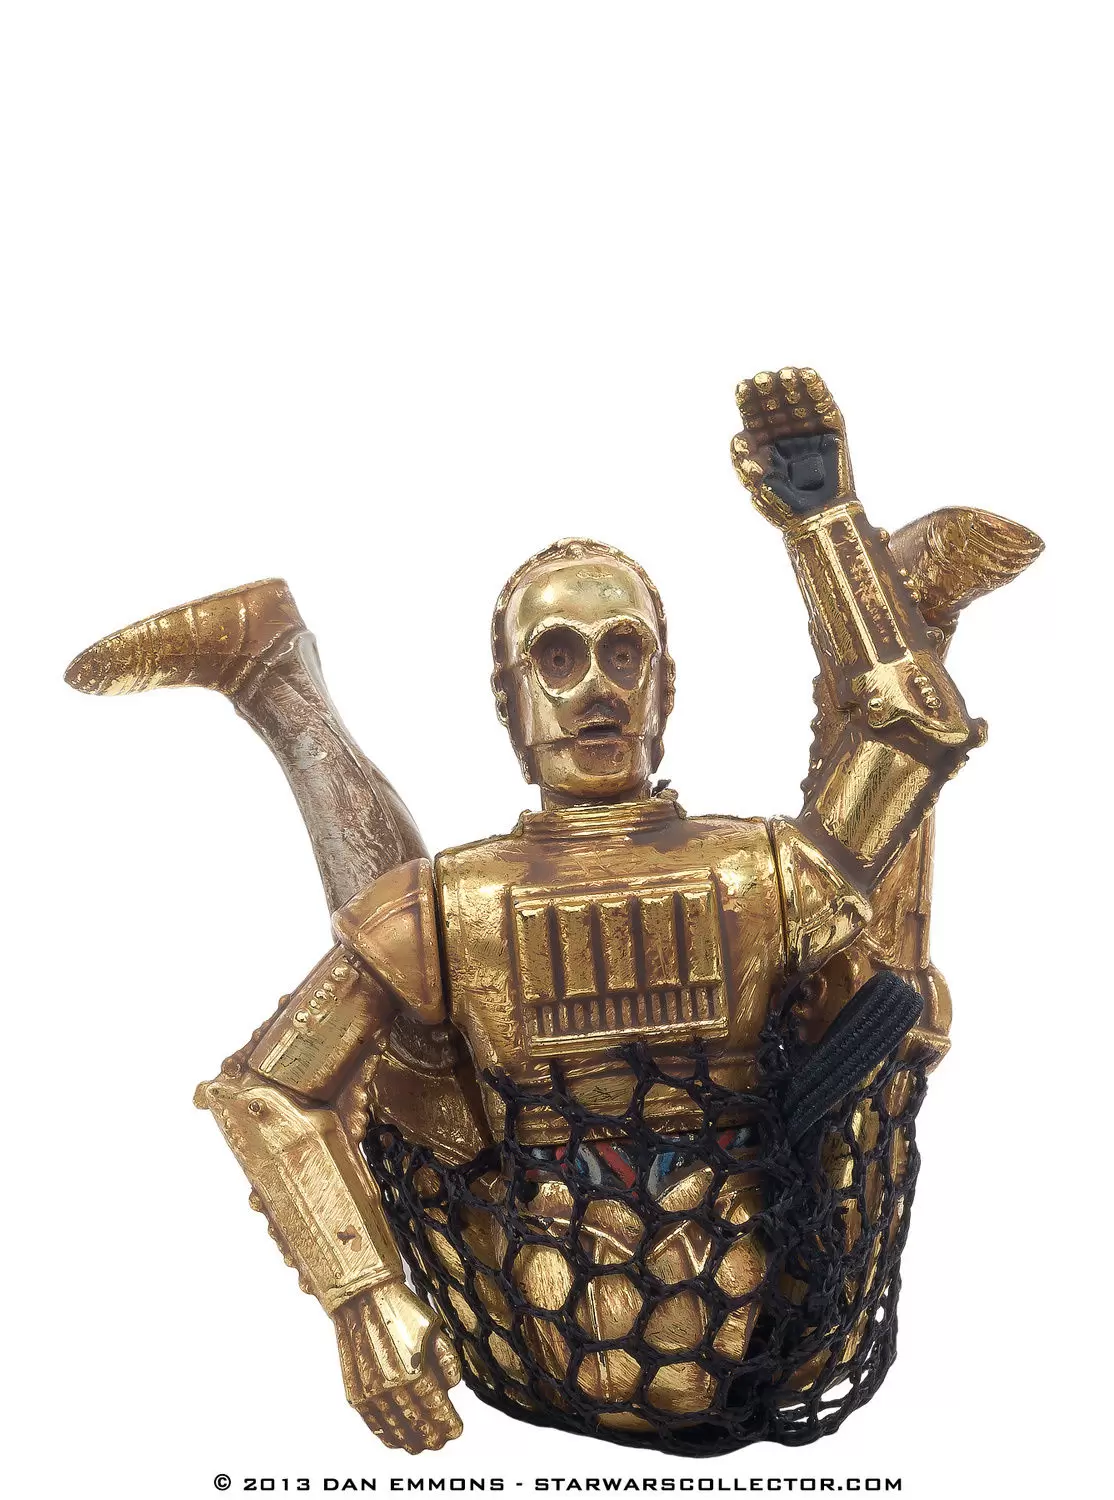 Power of the Force 2 - C-3PO with Realistic Metallized Body and Cargo Net